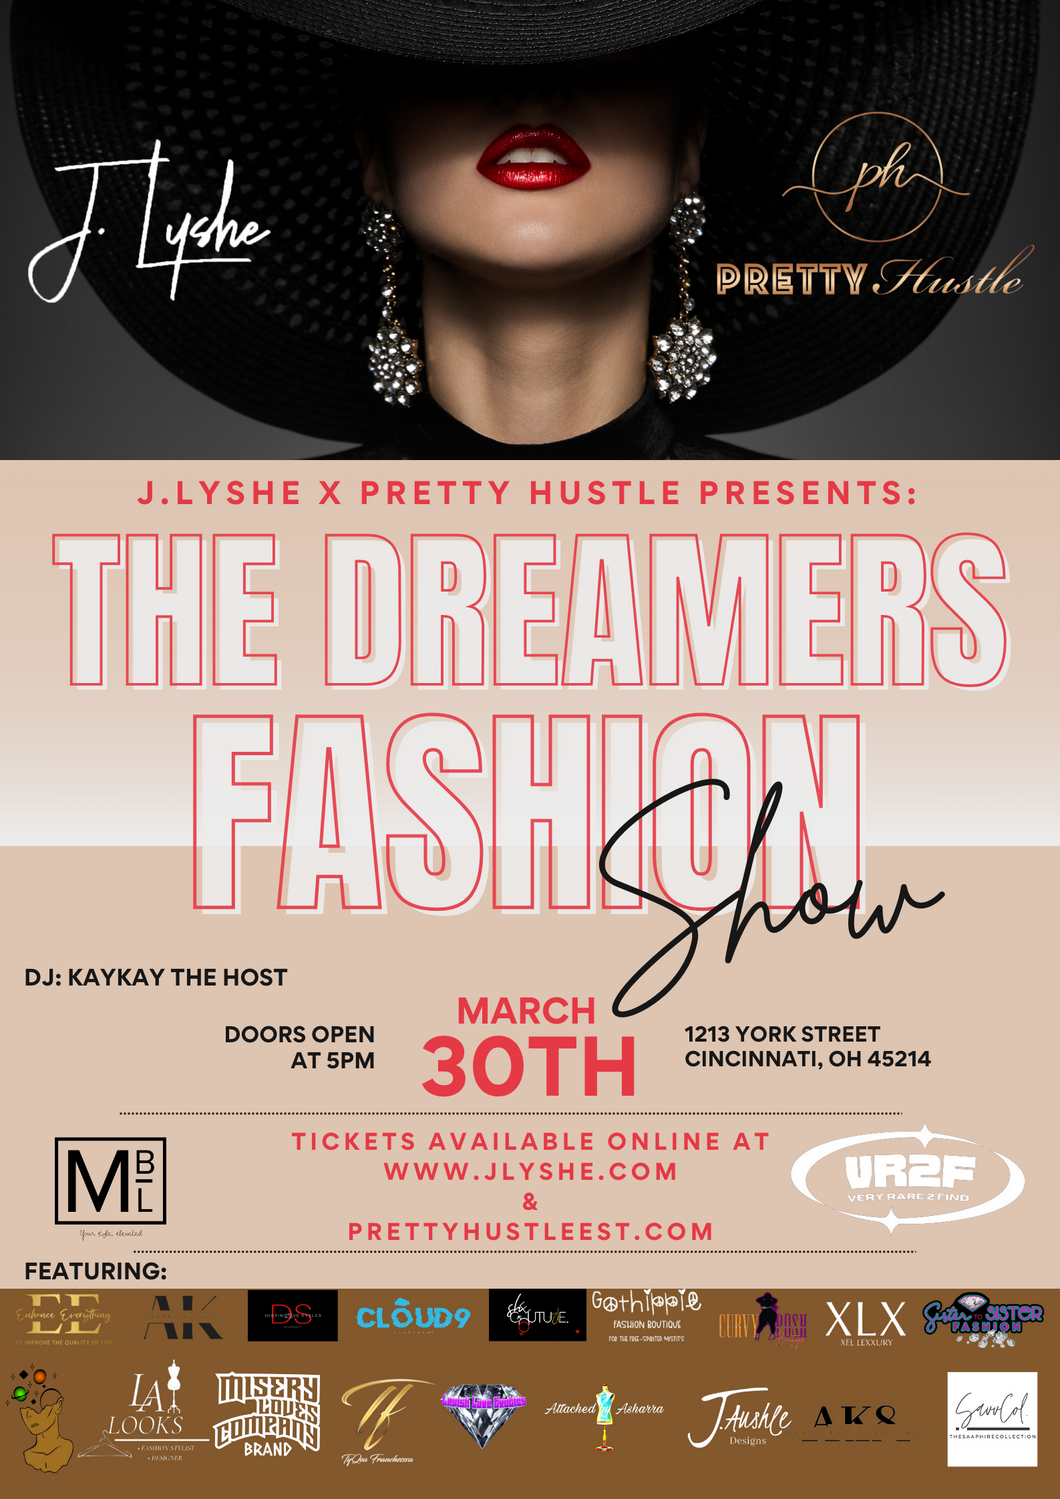 The Dreamers Fashion Show March 30th 5pm